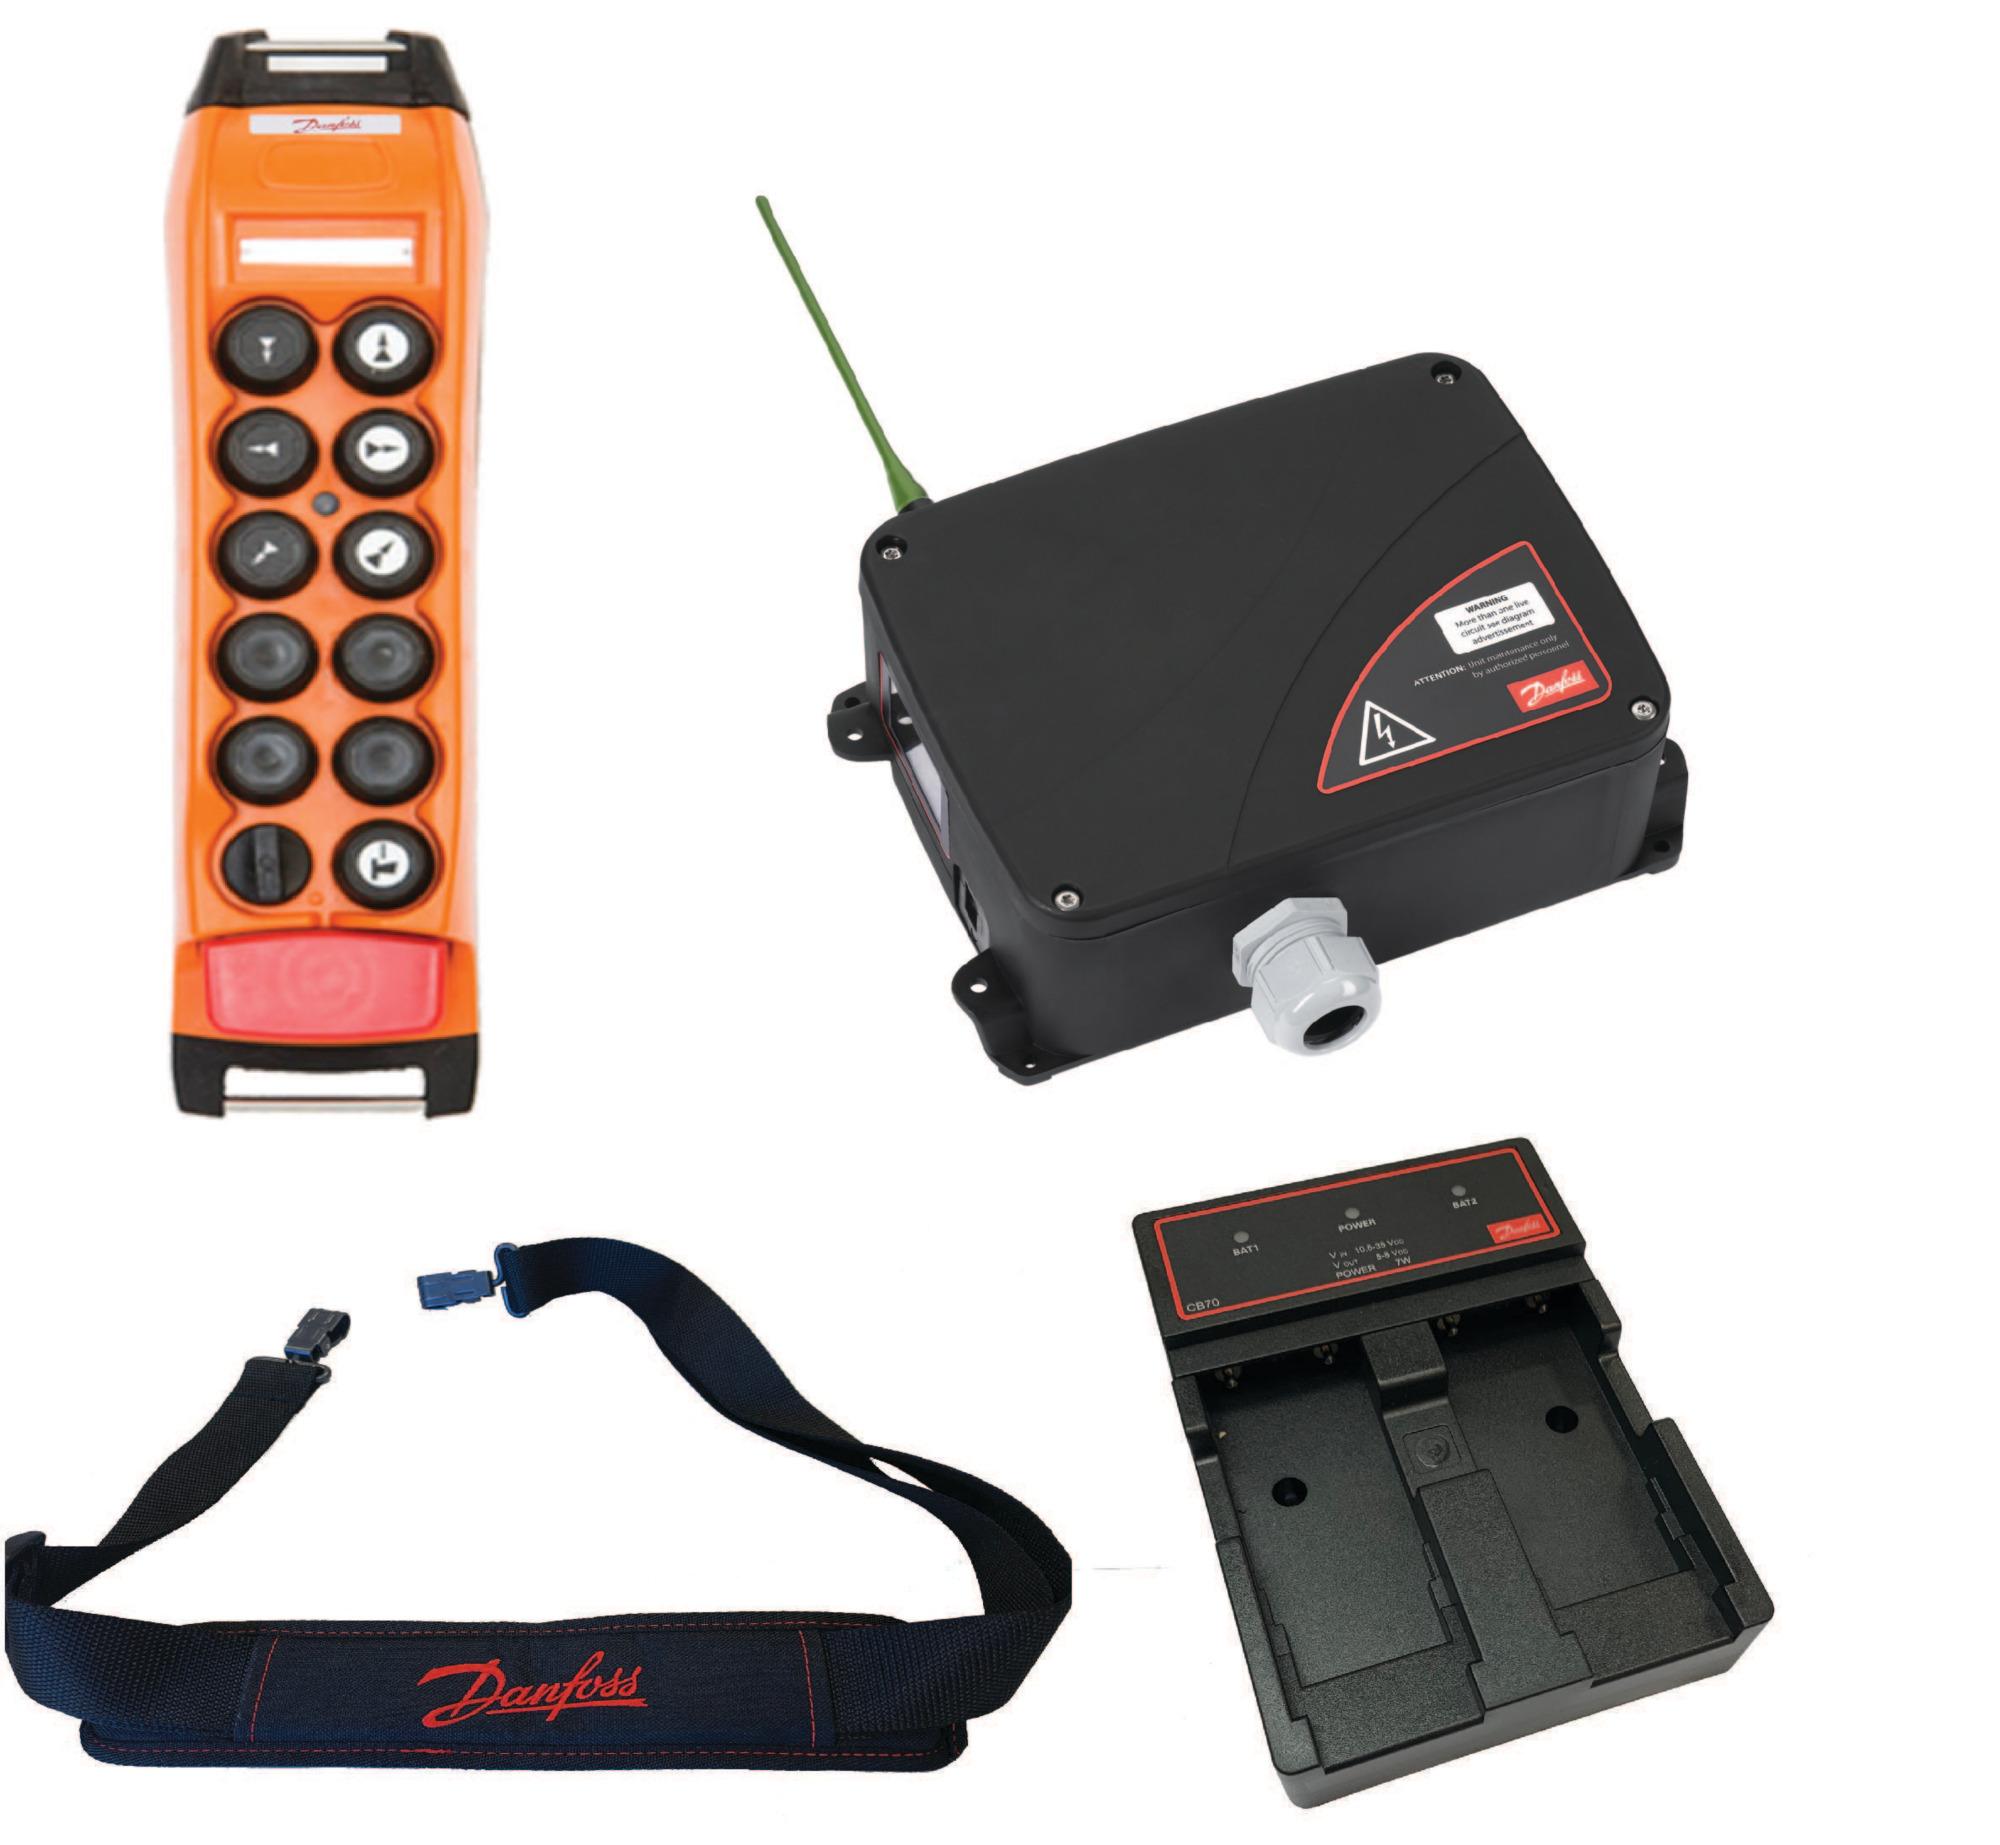 Remote control components and accessories category image